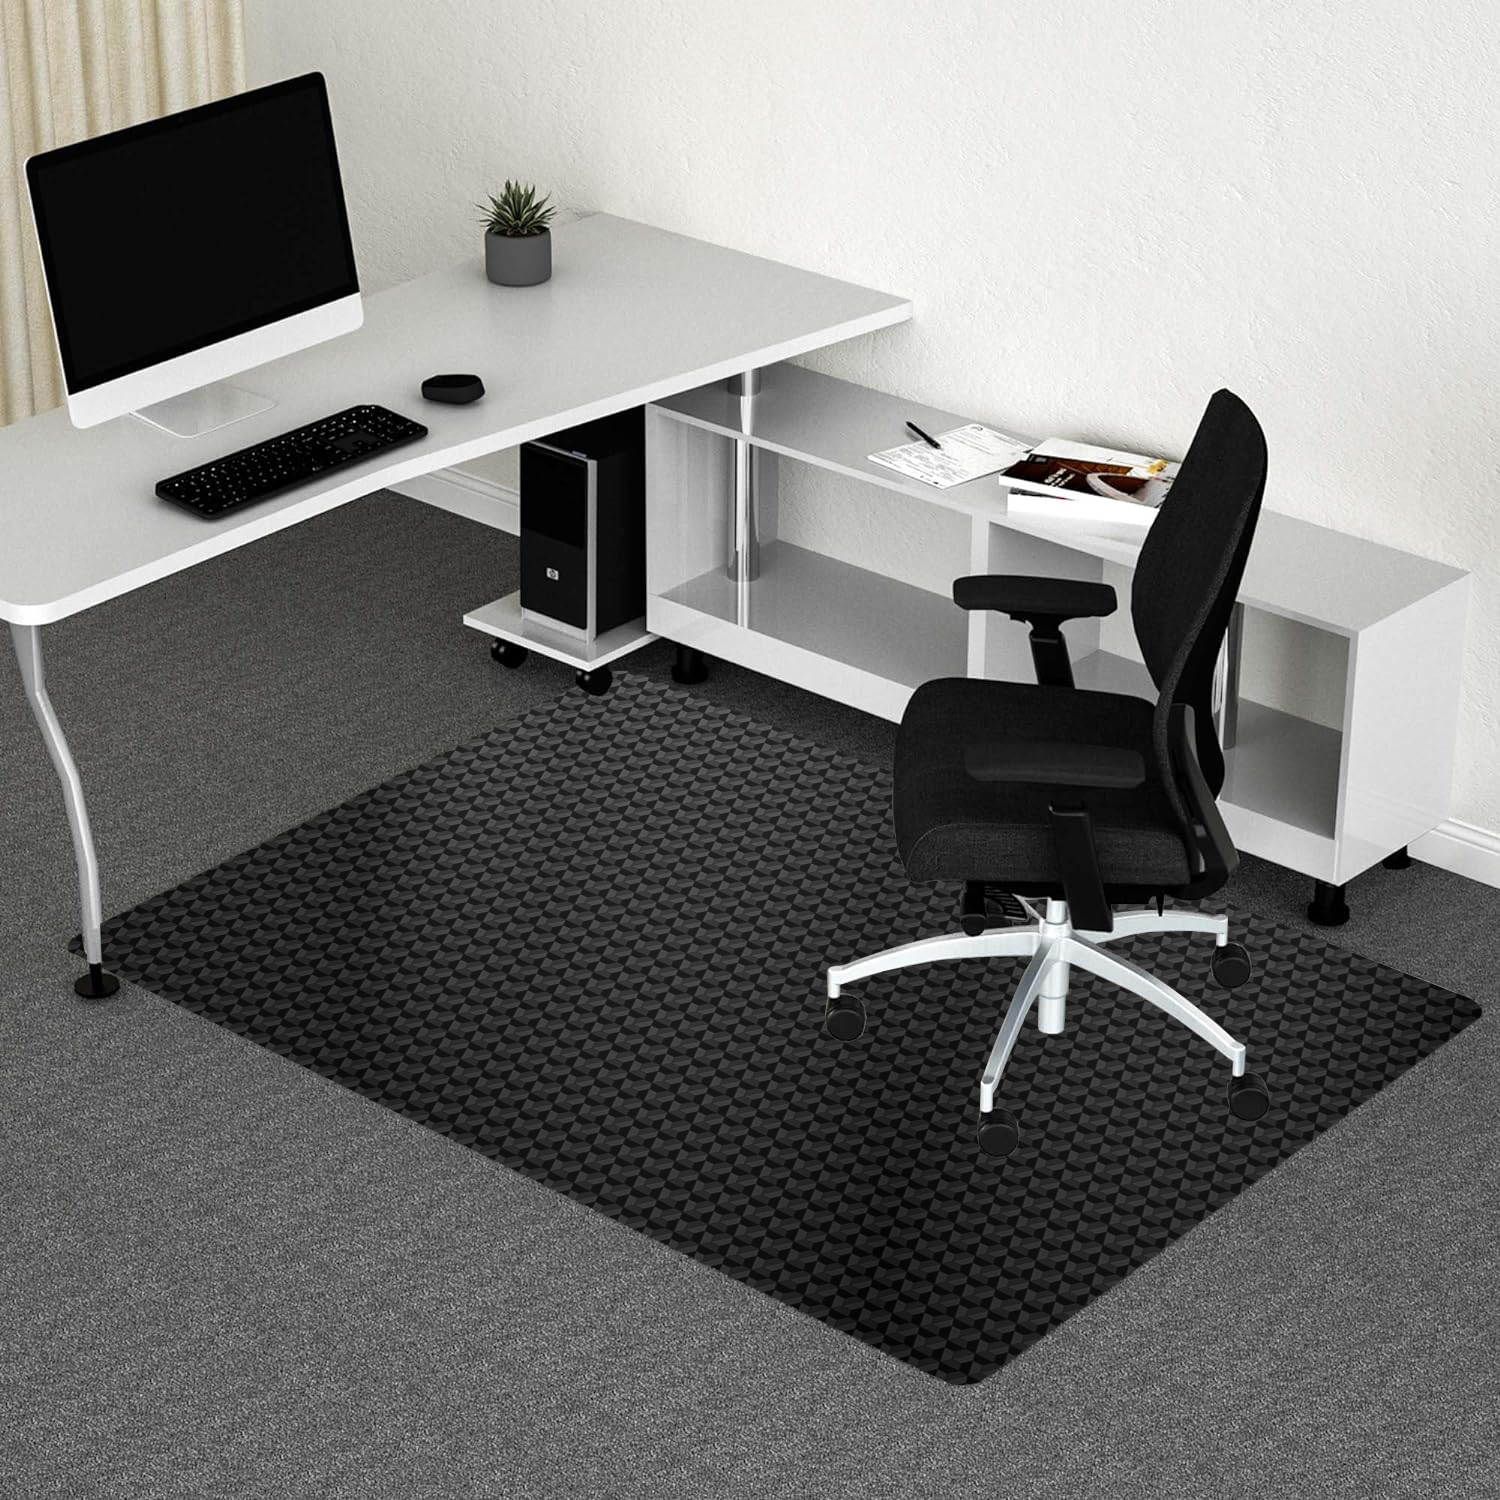 Non-Slip Floor Protector Mat for Office Chairs